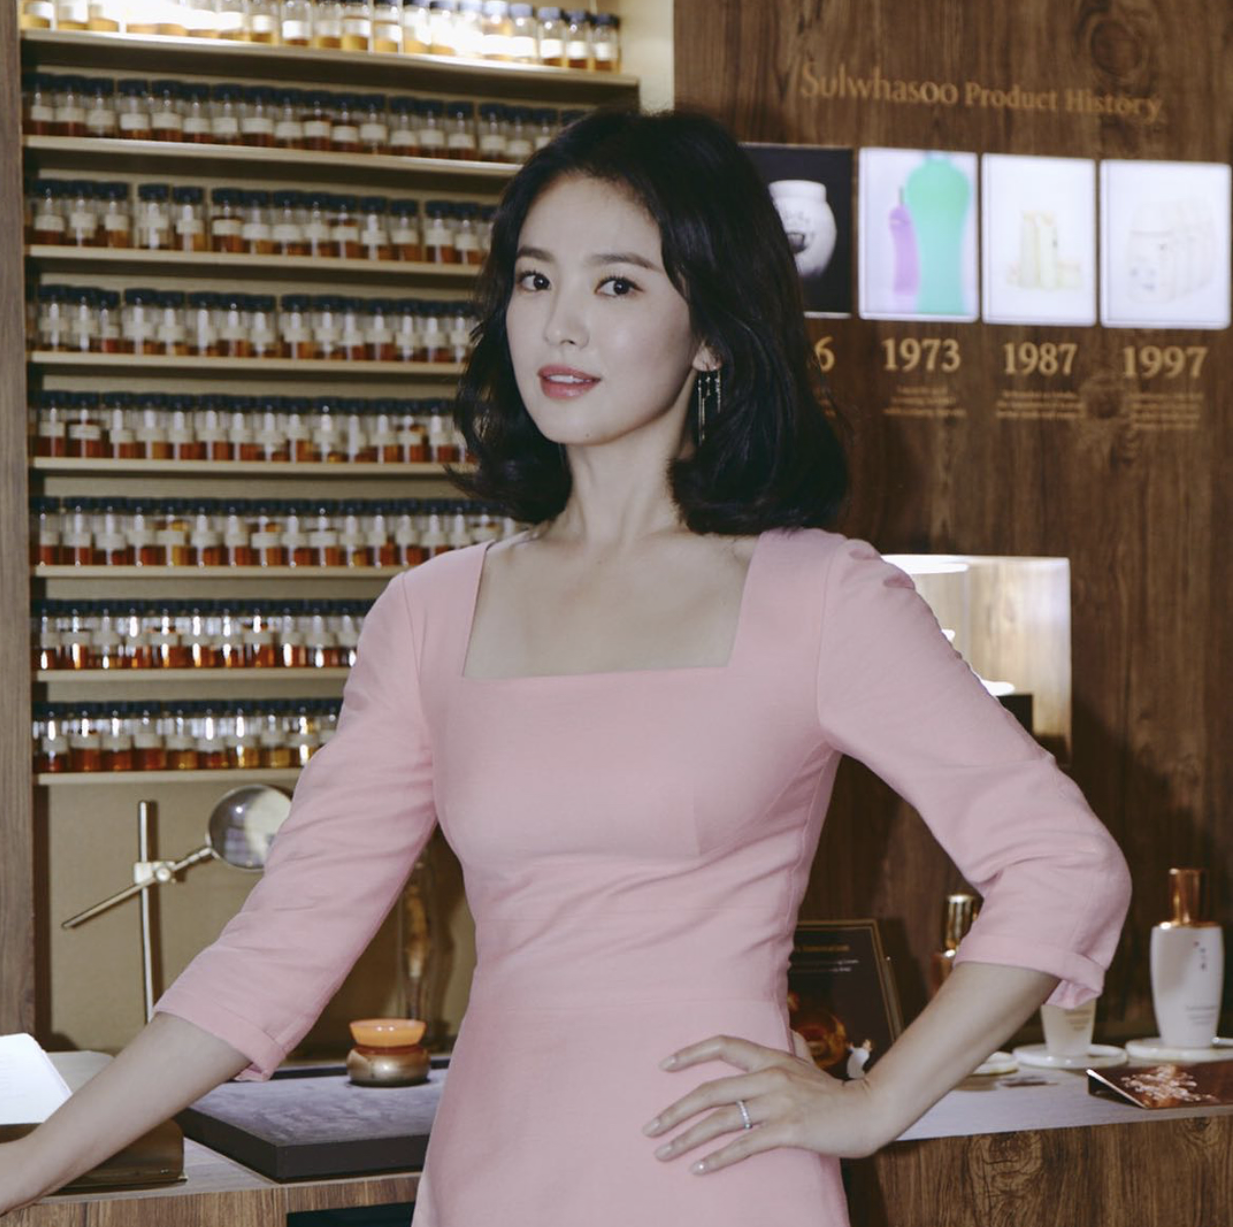 <p>Participated in Beauty brand Chugai Travel actor Song Hye-kyo continued to boast goddess beauty as usual.</p><p>On the 29th, Song Hye - kyo participated in Beauty Chugai Travel held in Hong Kong. Song Hye - kyo wearing a pink mini dress this day filled with an elegant yet lovely atmosphere.</p><p>A medium curly single medium hair style and a natural makeup further complemented his beauty.</p><p>On this day, Song Hye - kyo who appeared in Beauty Chugai Travel in another photo boasted its original beauty with a clean style wearing white blouse and Black Panther slacks.</p><p>Song Hye-kyos beautiful appearance Some netizens are really, a doll, If you are pretty like this after marriage, you are irritated, very elegant, elegant Song Hye-kyo actor I showed the reaction and presented my impression.</p><p>Meanwhile, Song Hye - kyo will breathe with Park Jokes through the drama Boyfriend scheduled for November.</p><p>Photo ㅣ Song Hye-kyo Instagram</p>